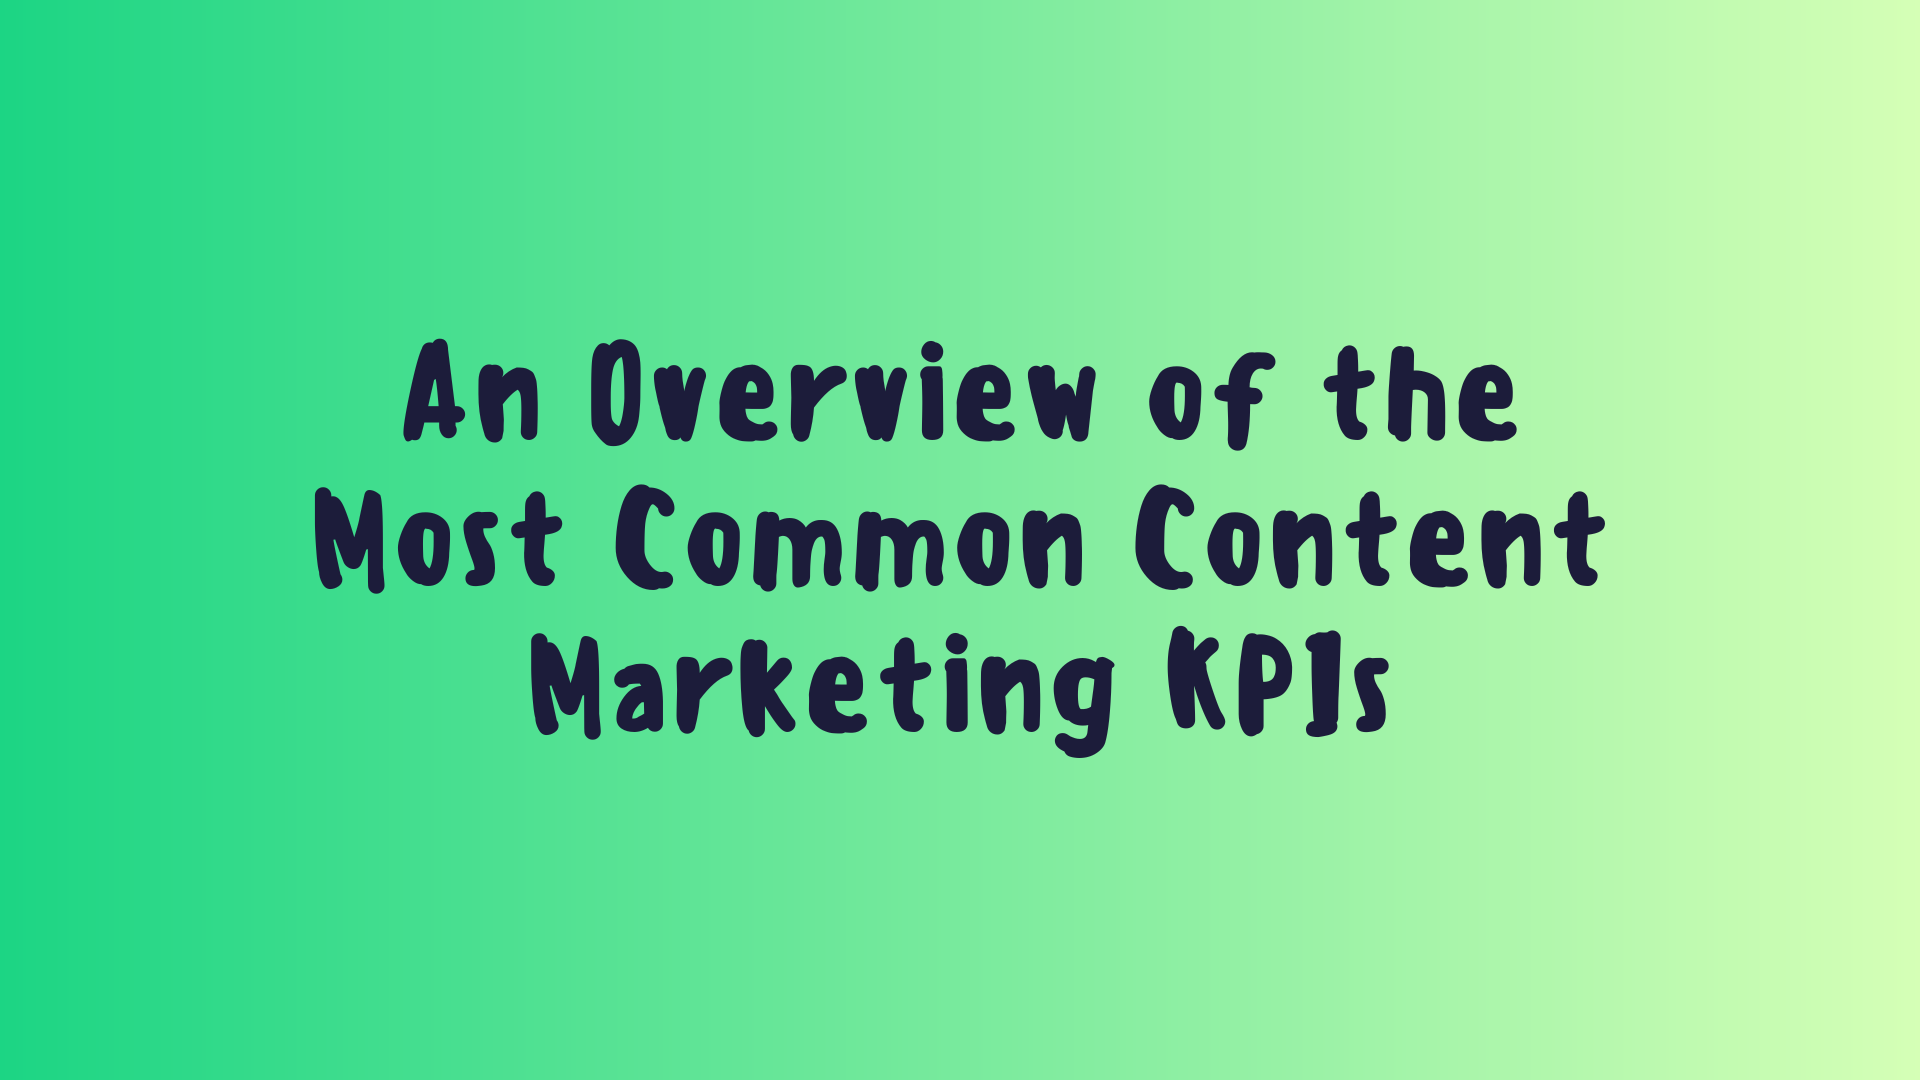 An Overview of the Most Common Content Marketing KPIs